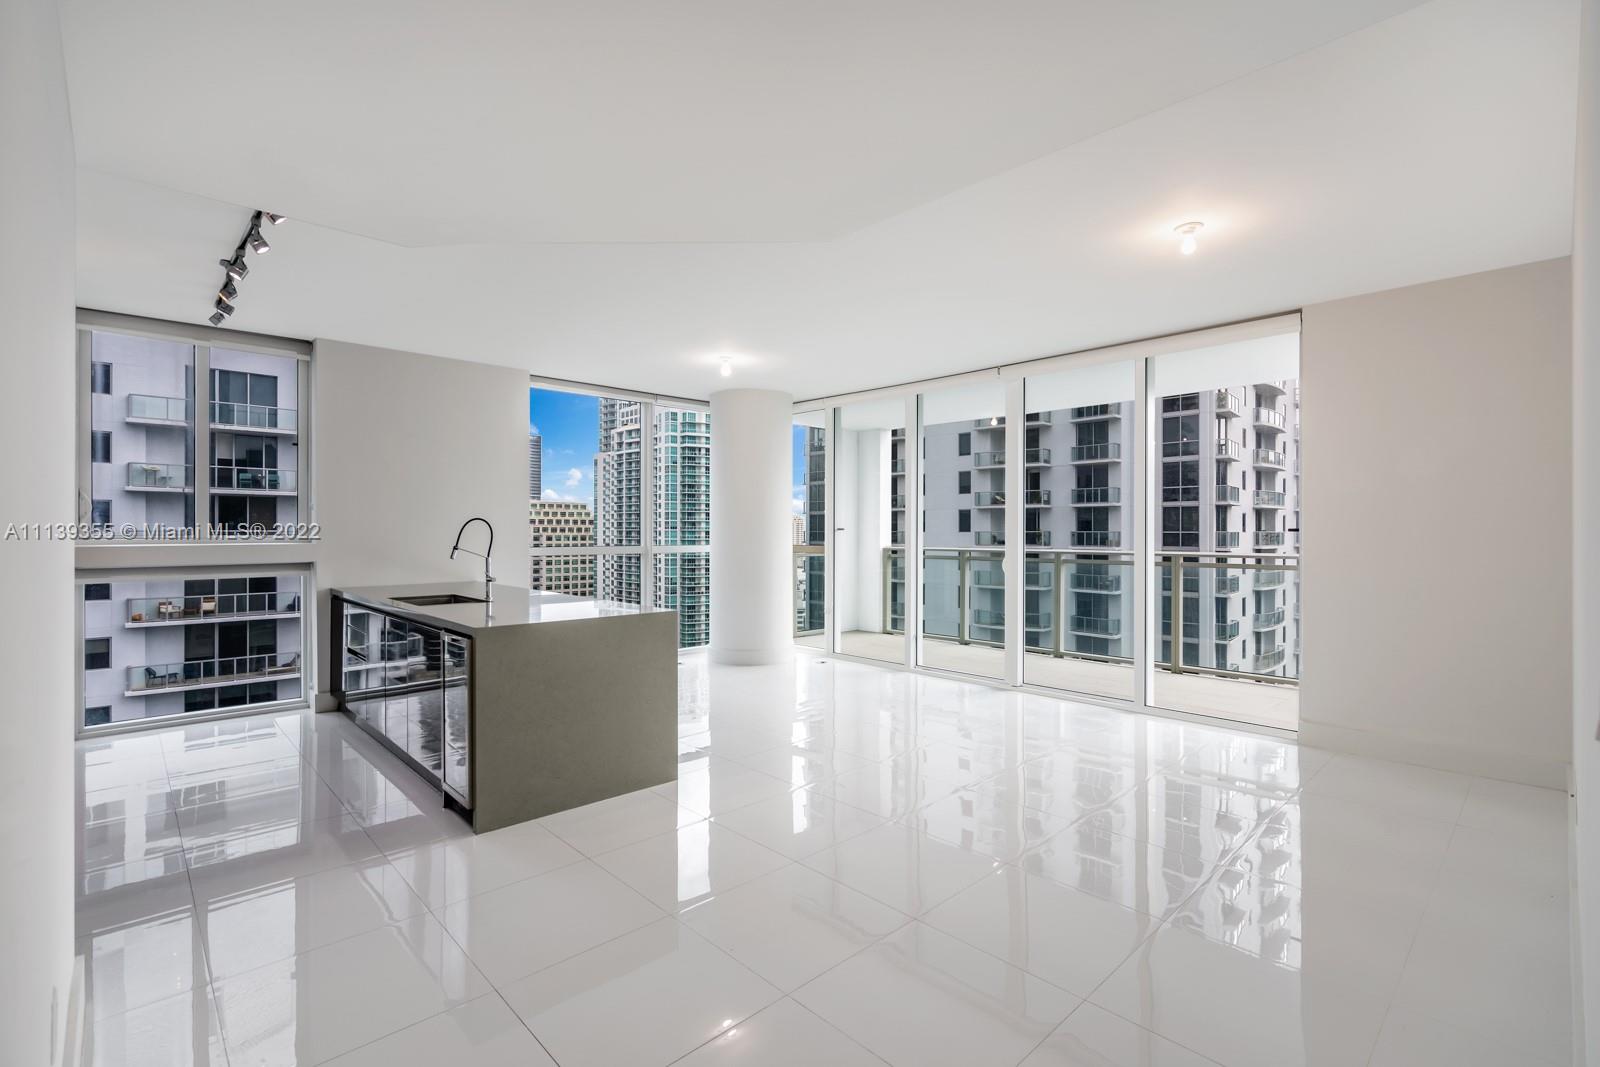 Fabulous 3 Bedroom, 3 Bath corner unit in the heart of Brickell financial district. Features Bosch appliances, Porcelanosa fixtures, Nolte cabinetry, and an oversized balcony with spectacular city and bay views. Situated in the best location in Brickell, The Bond is steps away from Brickell City Centre and Mary Brickell Village and offers top-of-the-line amenities such as a luxury pool, state-of-the-art gym, new Starbucks in the lobby, spa, 24-hour concierge, and valet service!